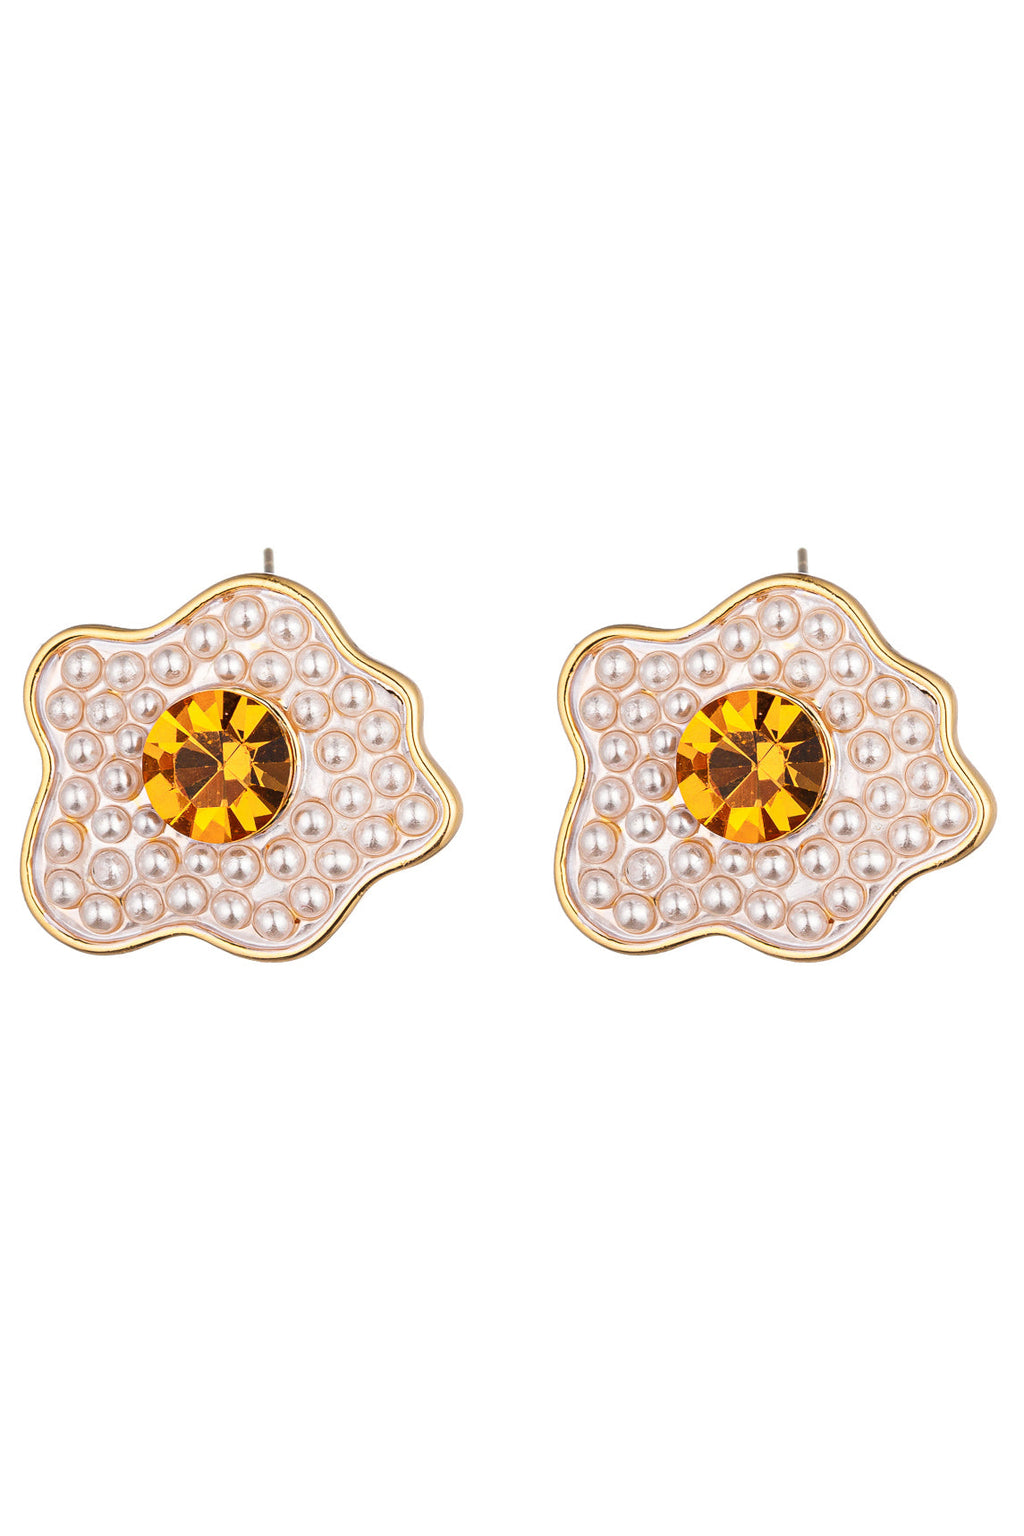 Elevate Your Look with Sunny Side 18K Gold Plated Stud Earrings.